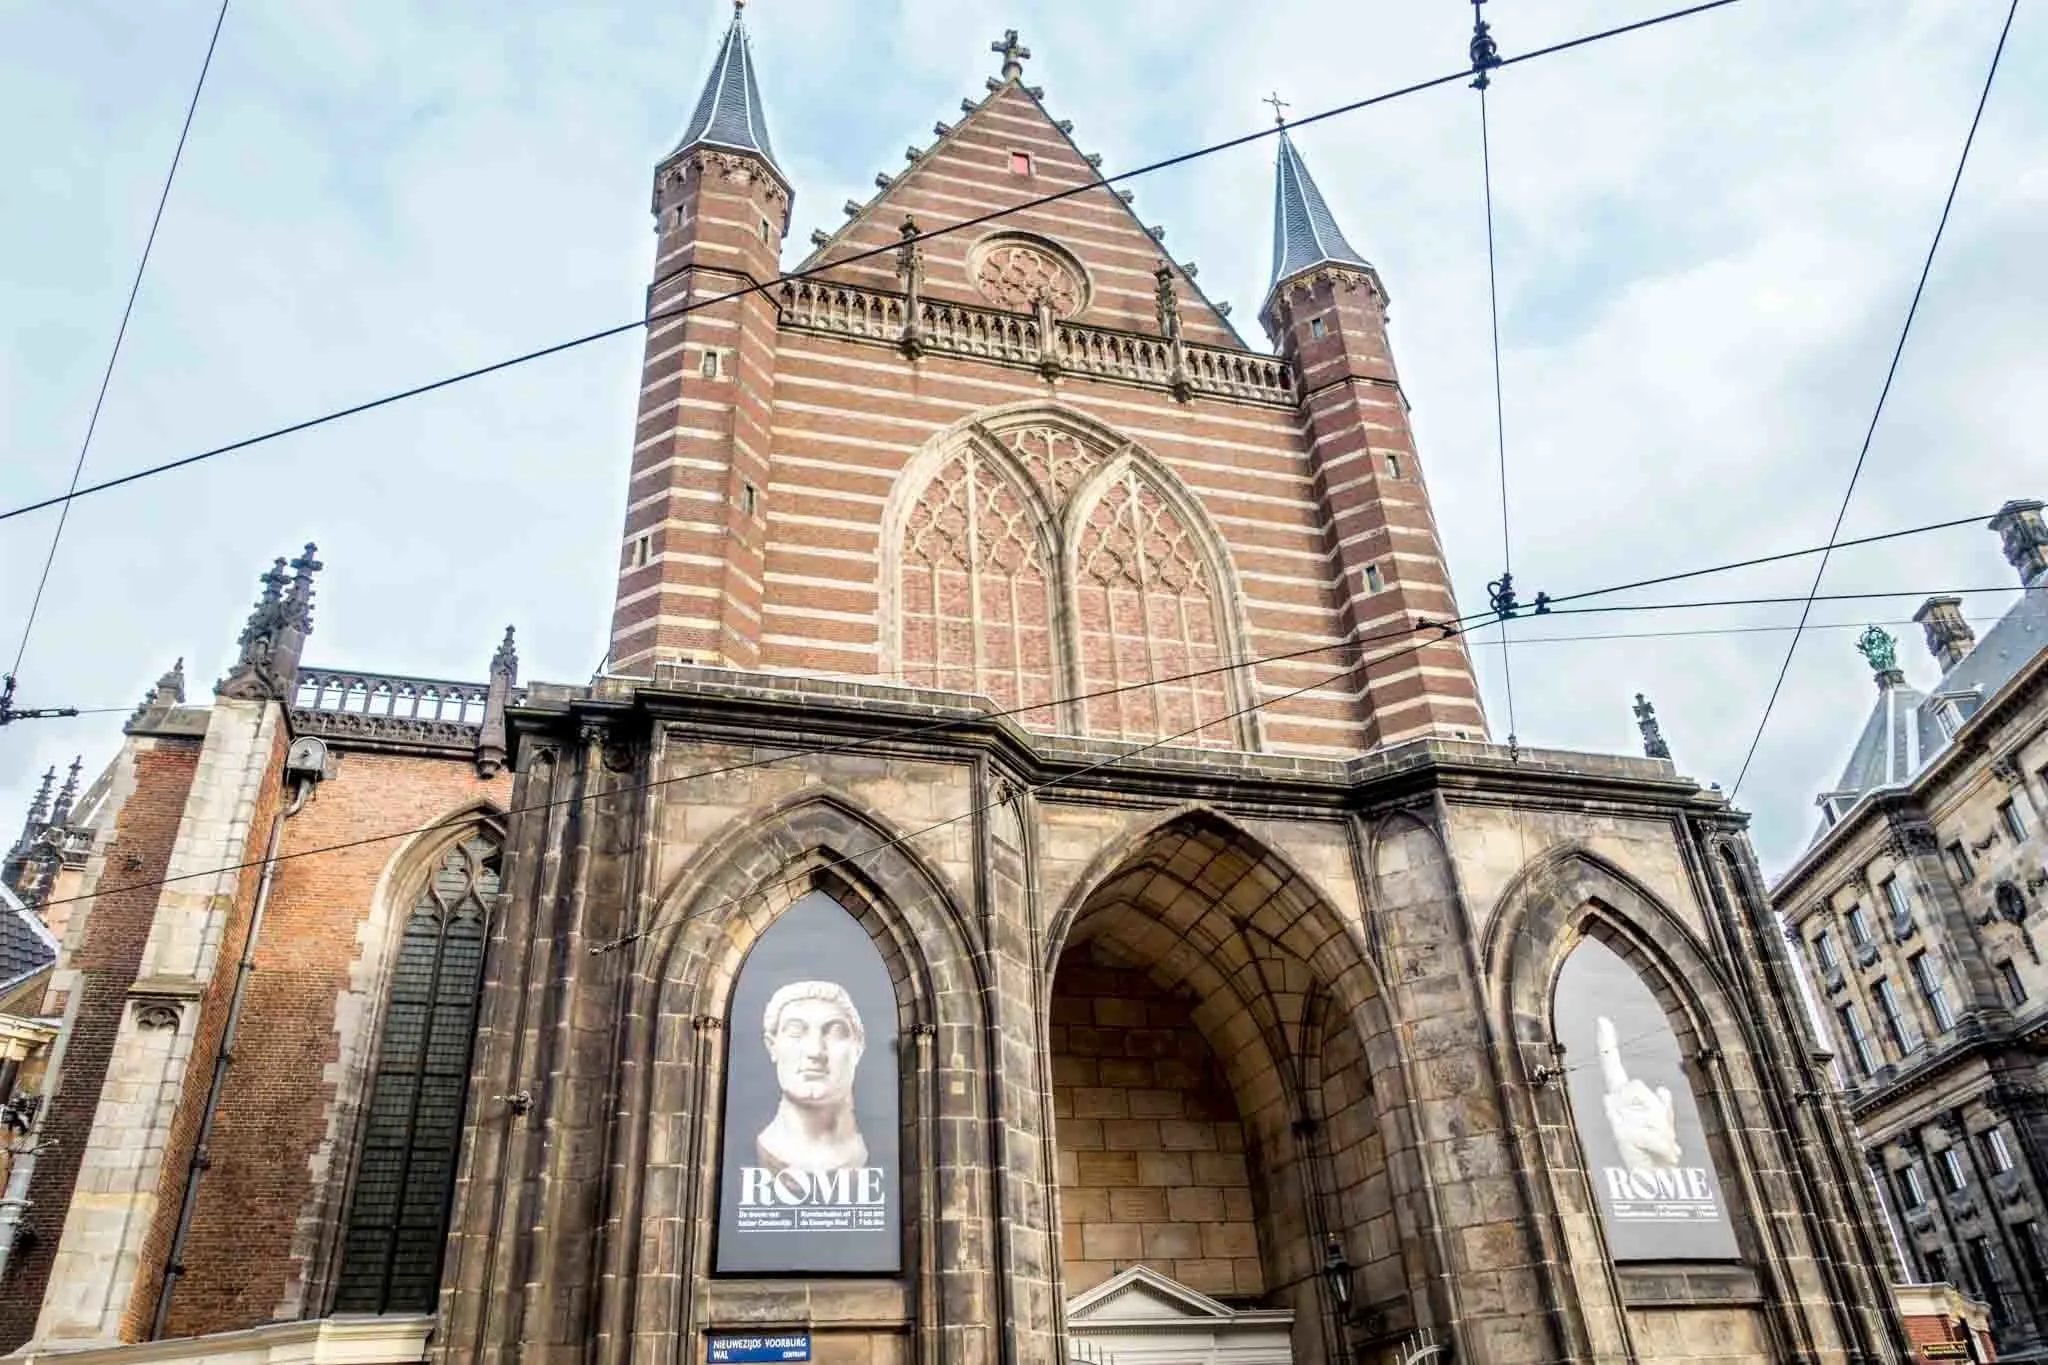 Church with posters advertising an exhibit inside